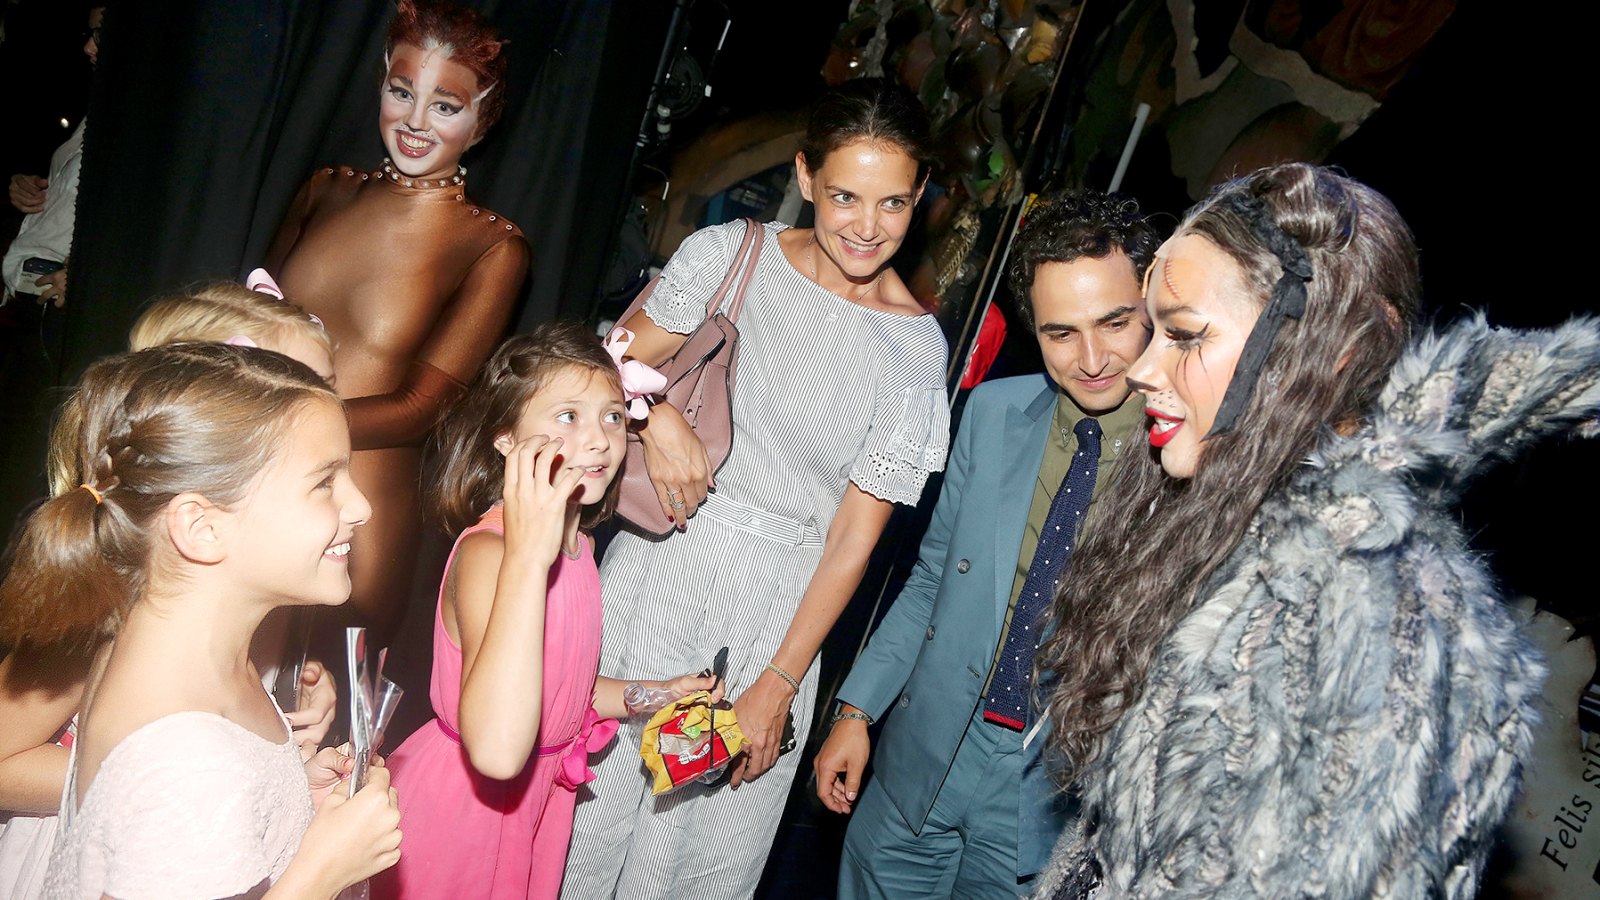 Suri Cruise, guest, Emily Pynenberg as "Cassandra", Katie Holmes, Zac Posen, Leona Lewis as "Grizabella The Glamour Cat" chat backstage at the hit musical "Cats" on Broadway at The Neil Simon Theatre on August 16, 2016 in New York City.